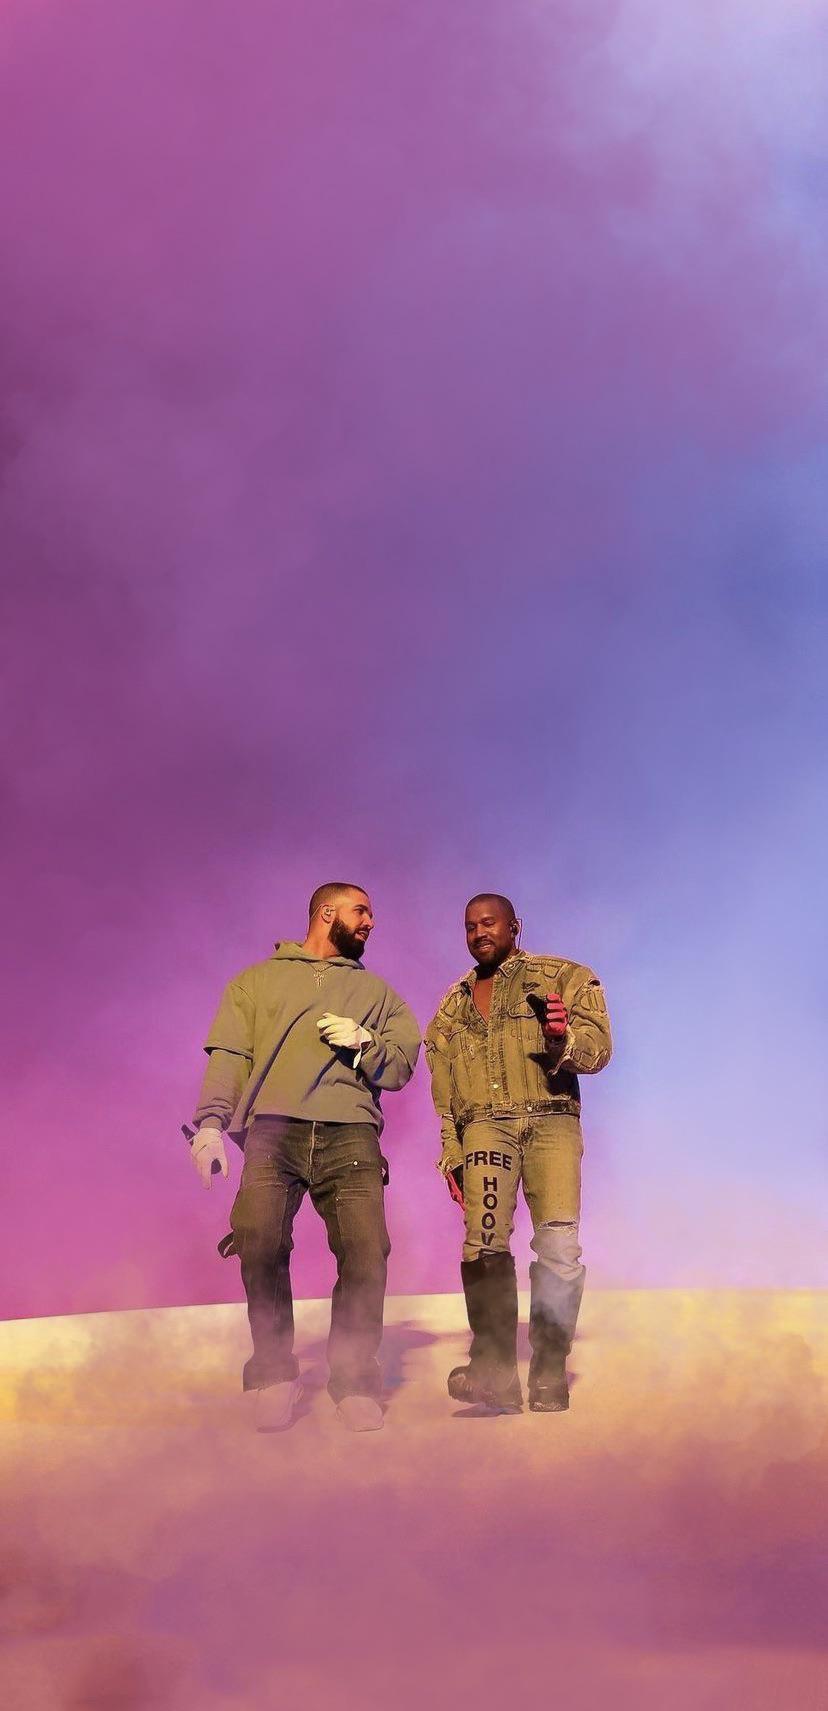 Some wallpaper I made from the Kanye and Drake concert